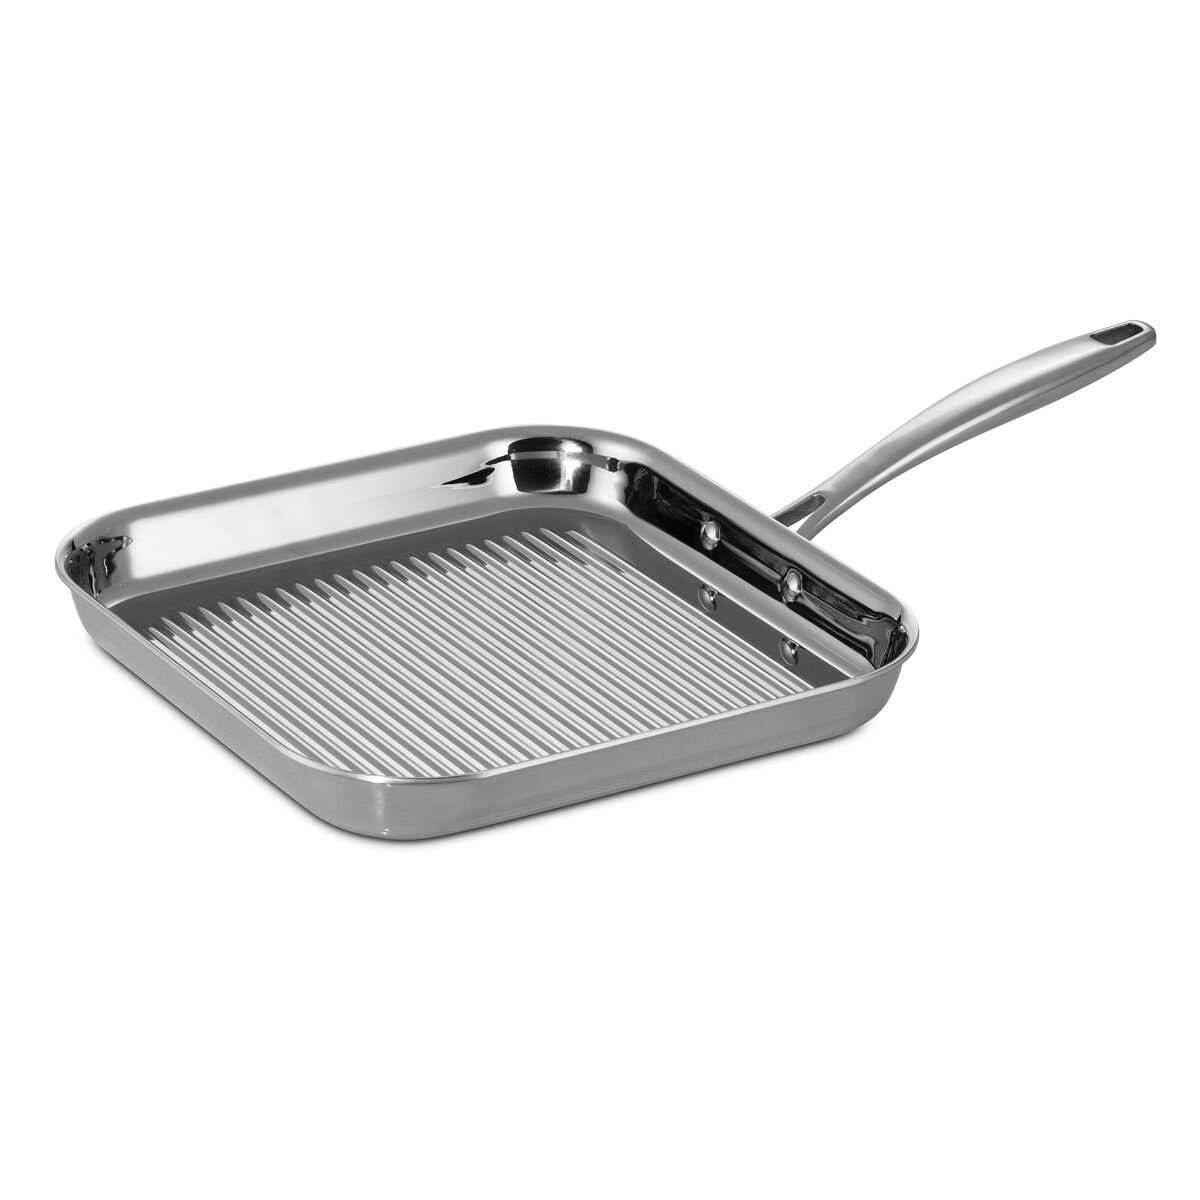 Tramontina Gourmet 11 Tri-Ply Clad Square Grill Pan Stainless Steel